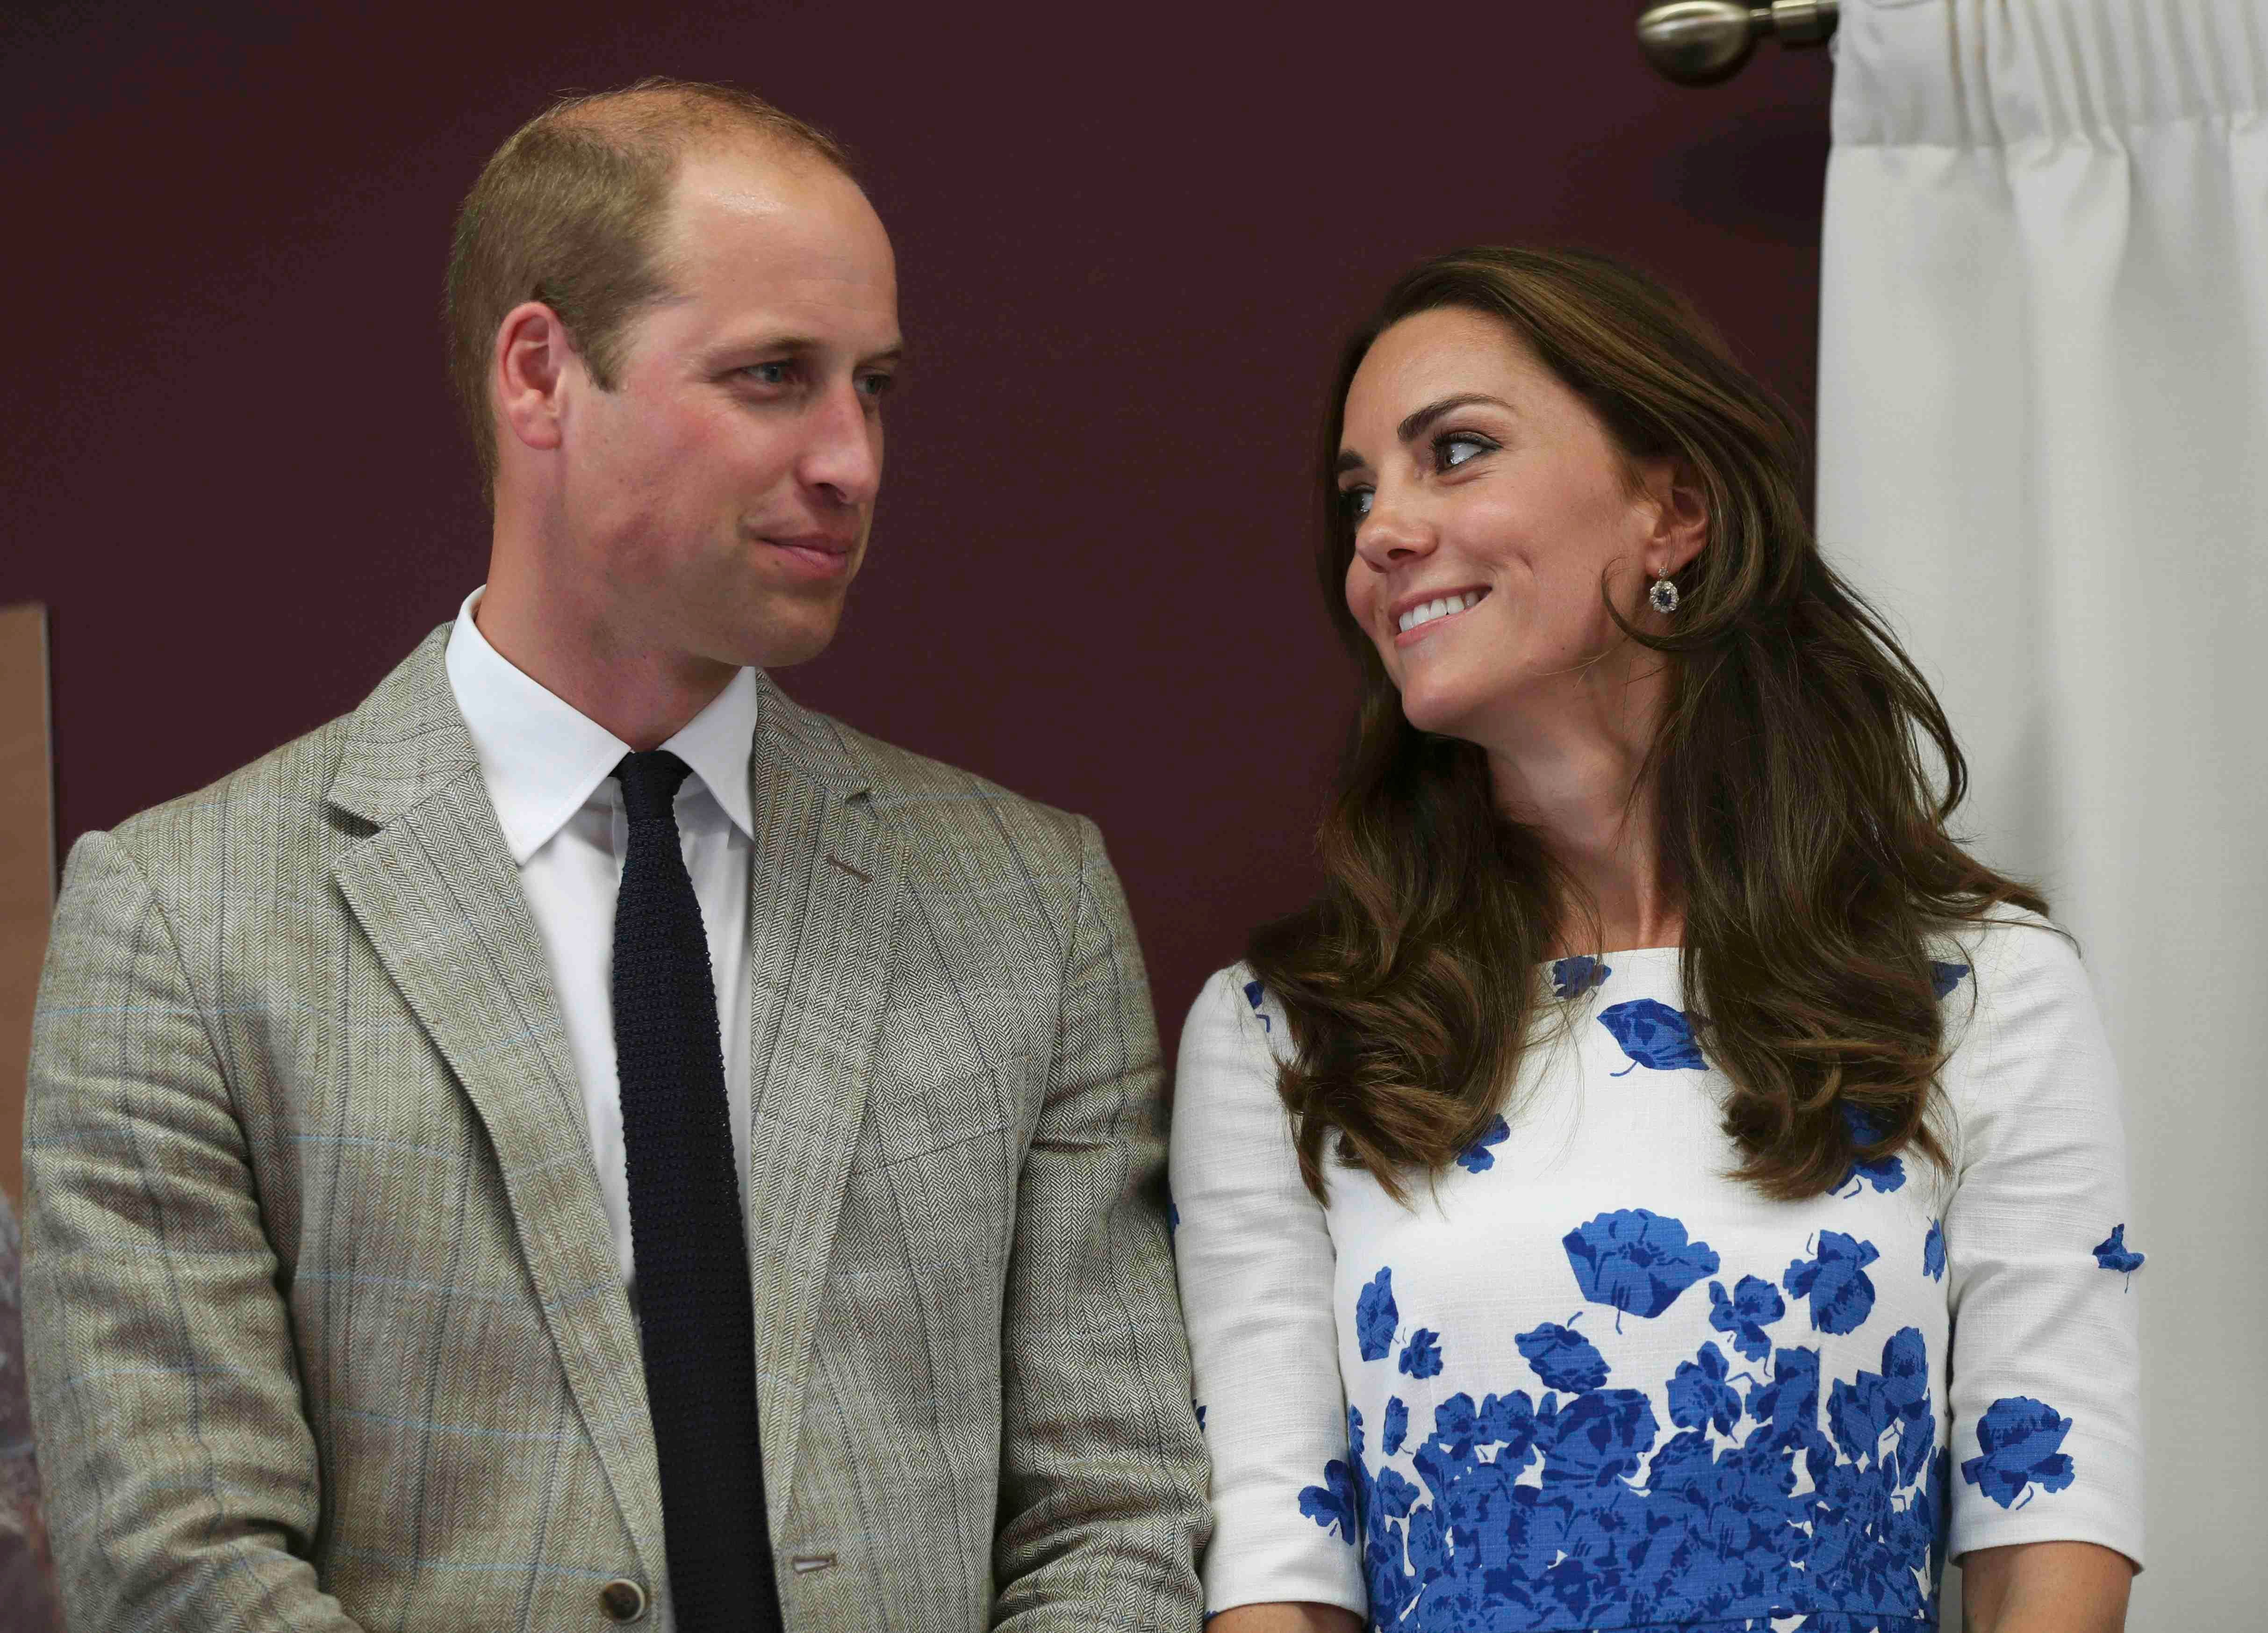 Prince William and Kate Middleton during their visit to Keech Hospice Care on August 24, 2016 in Luton, England | Photo: Getty Images 